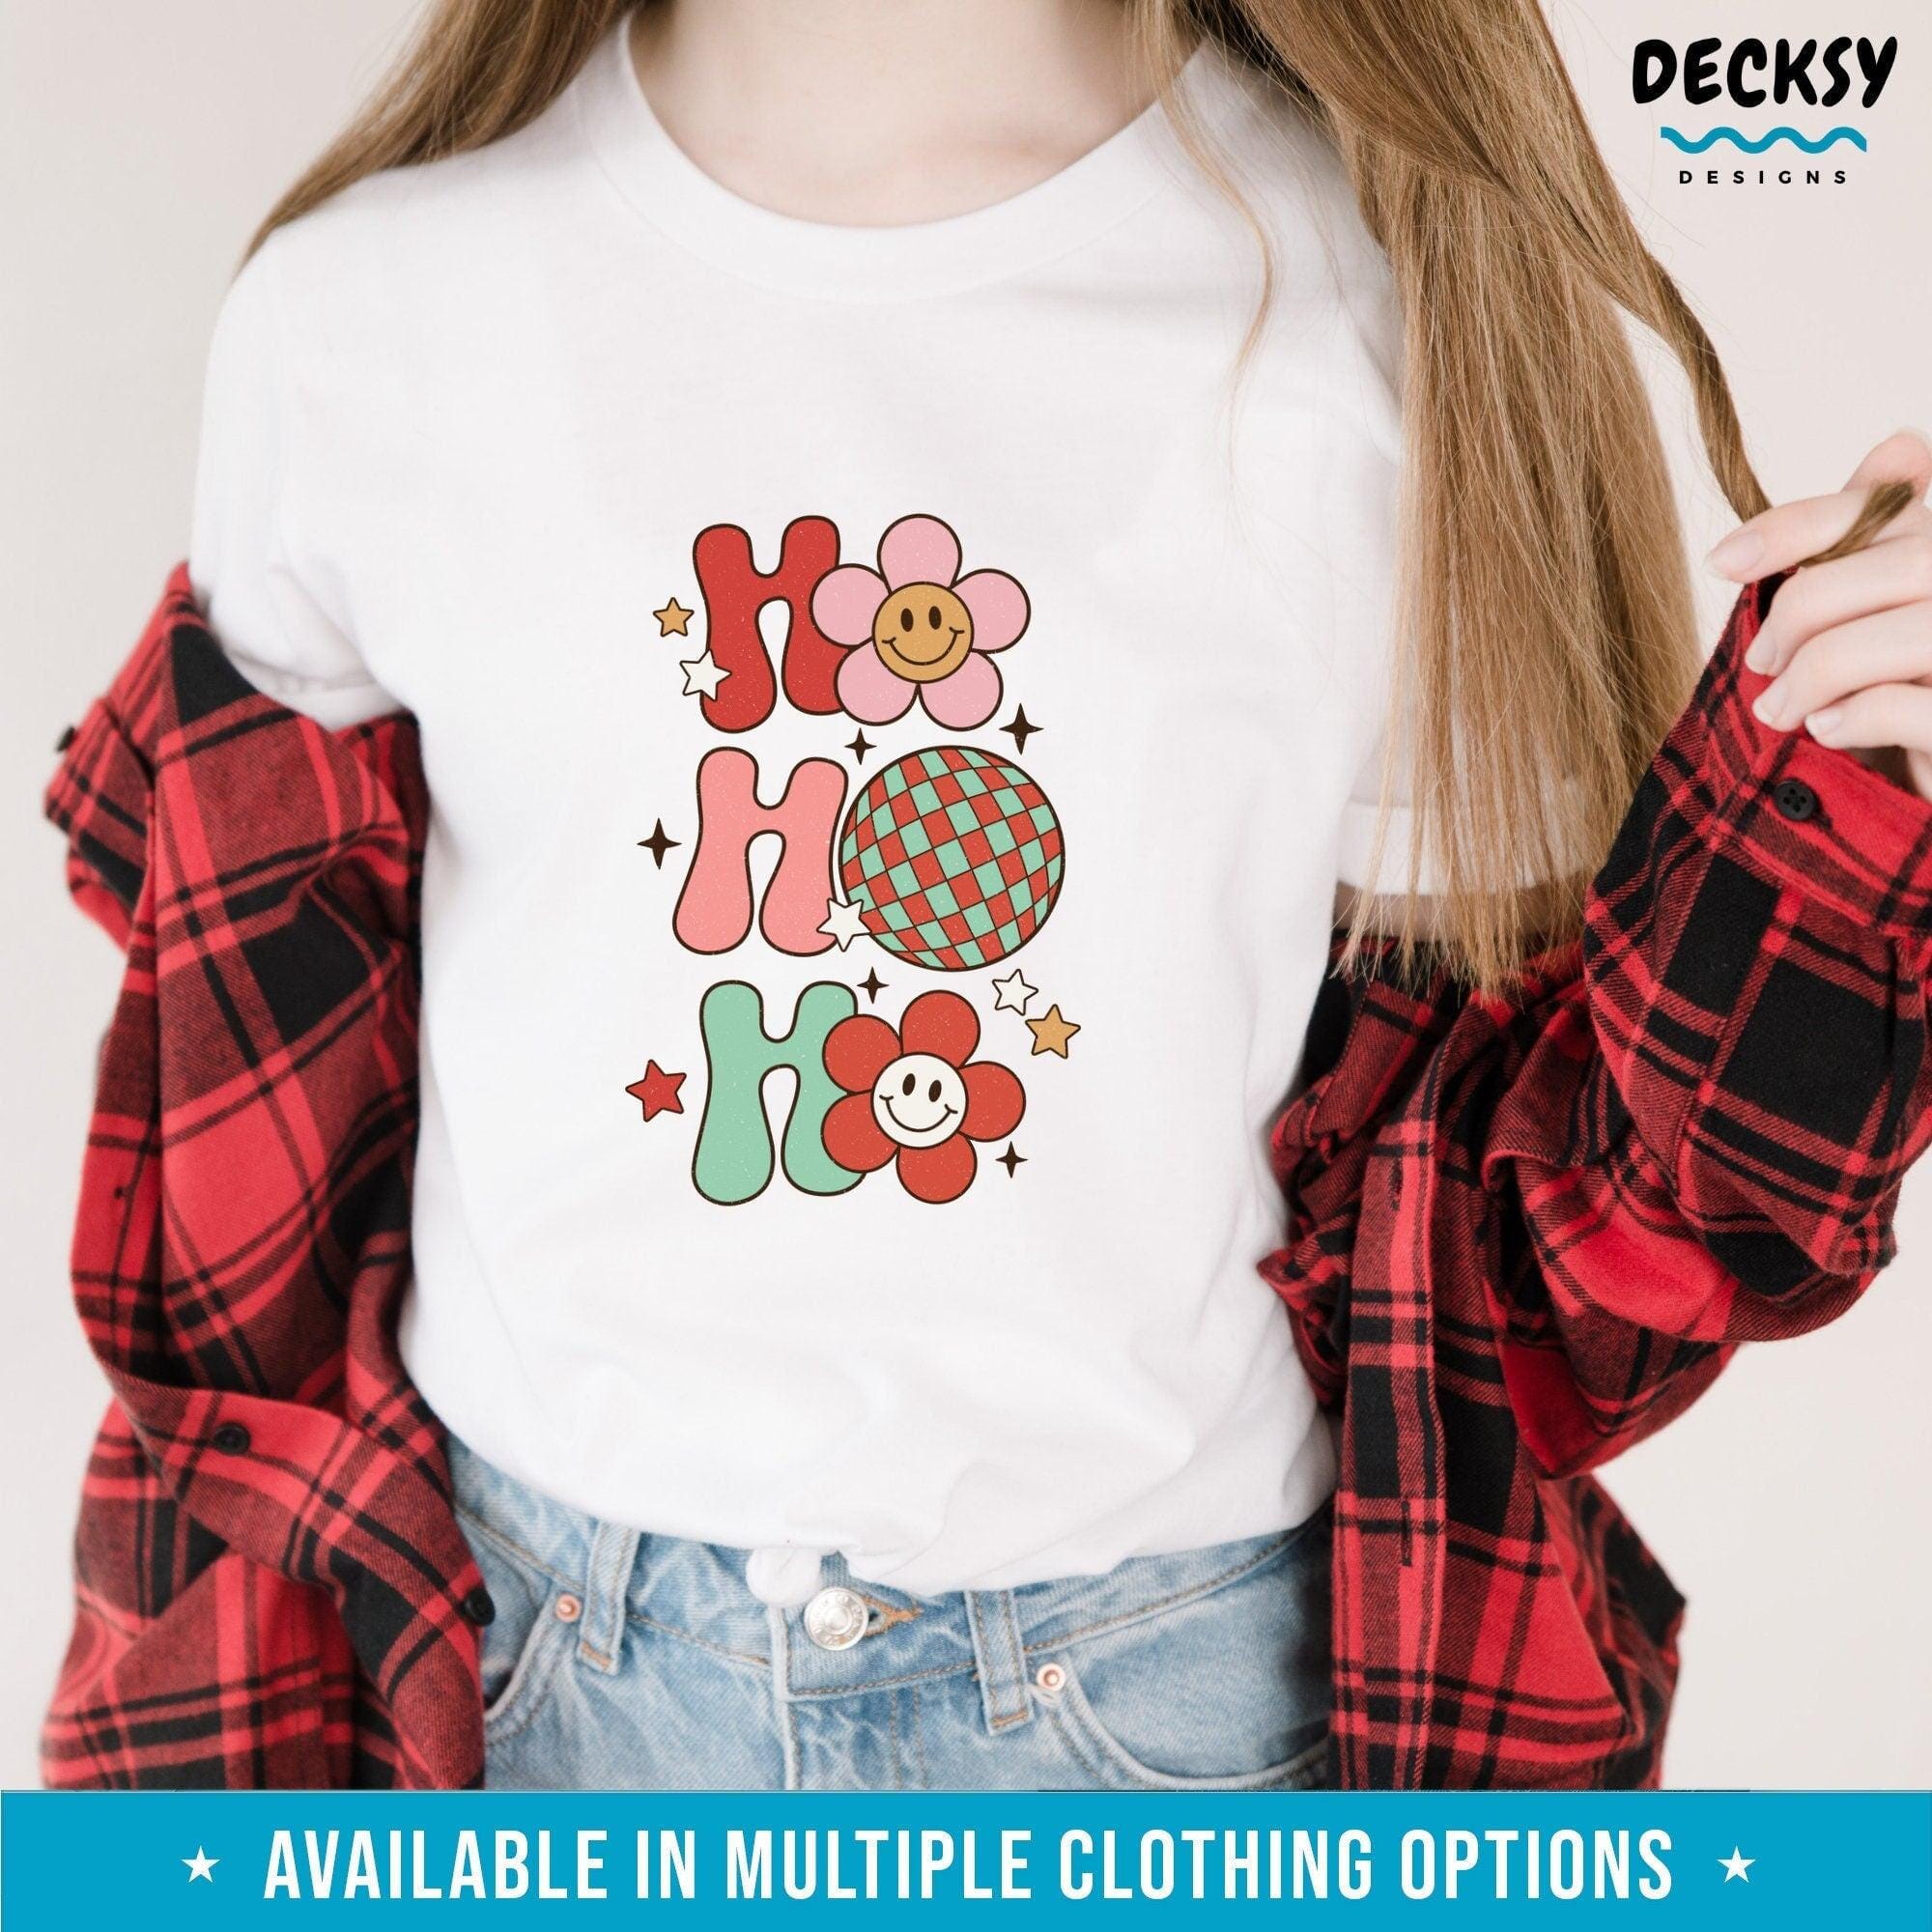 Ho Ho Ho Shirt, Holiday Shirt Gift For Family-Clothing:Gender-Neutral Adult Clothing:Tops & Tees:T-shirts:Graphic Tees-DecksyDesigns